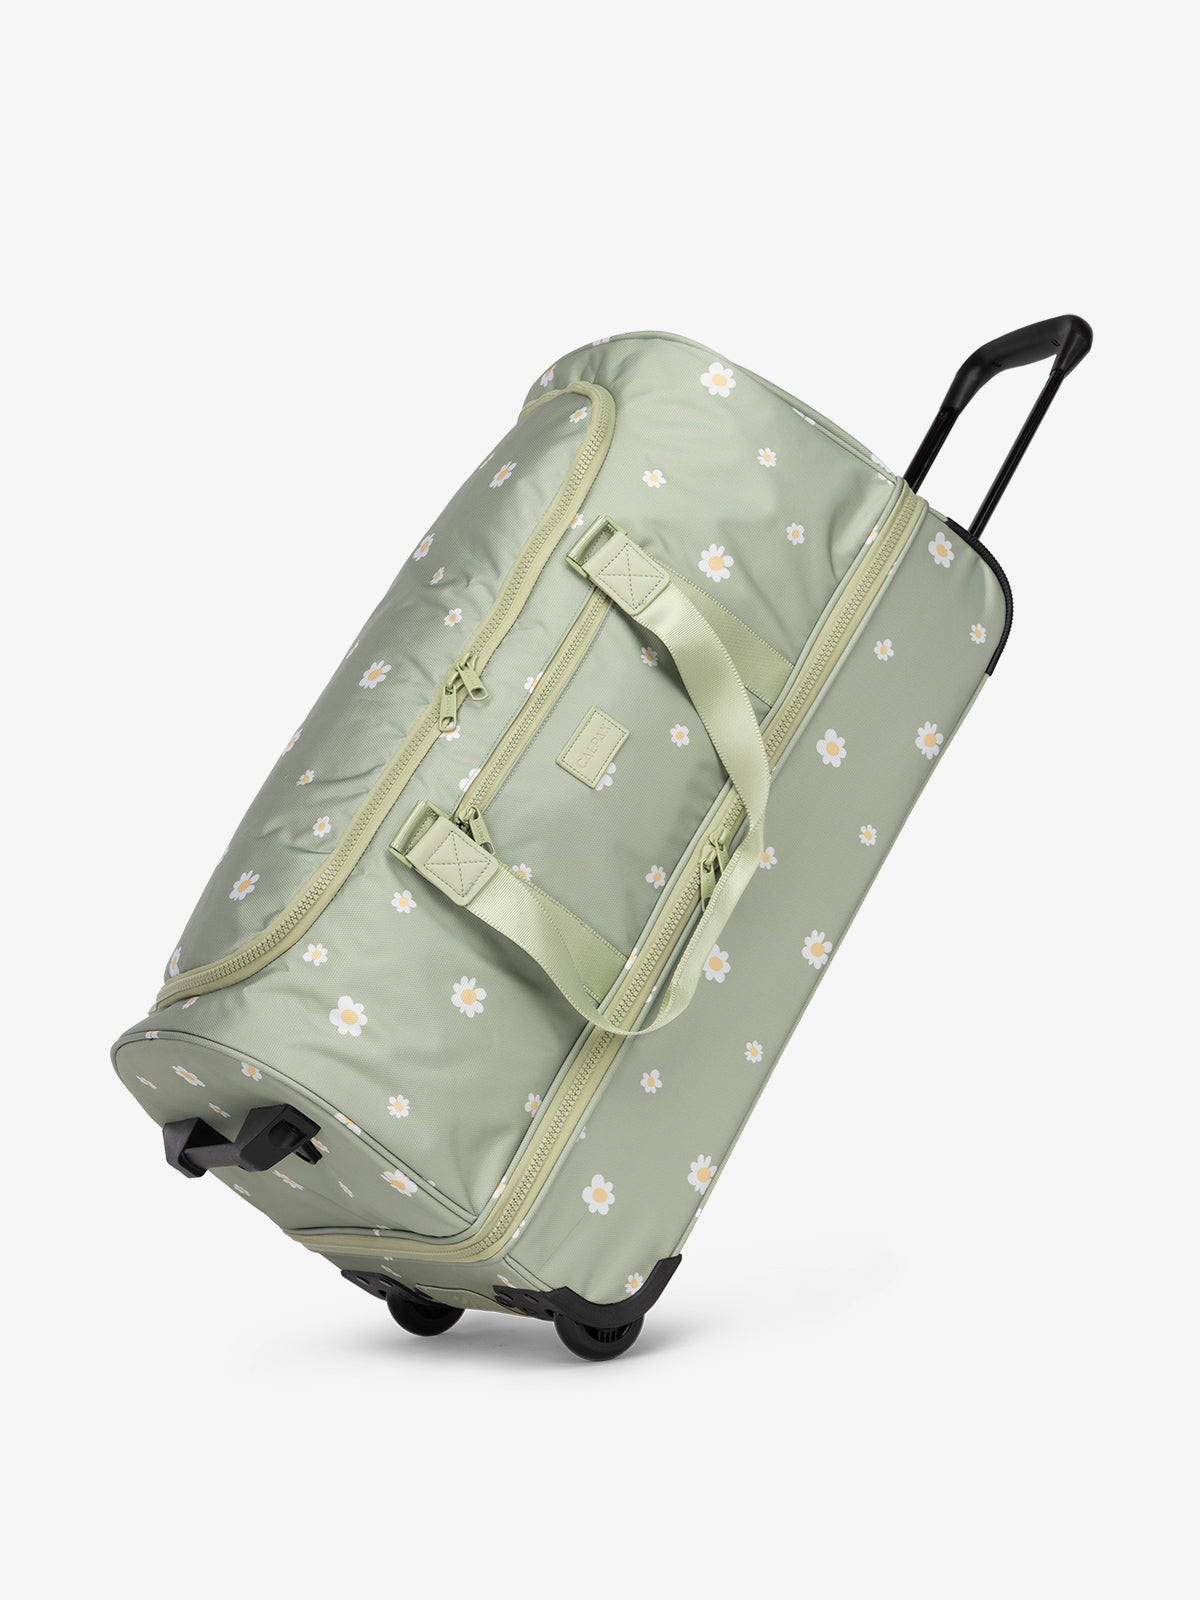 Distance Accross Large Wheeled Duffle Bag